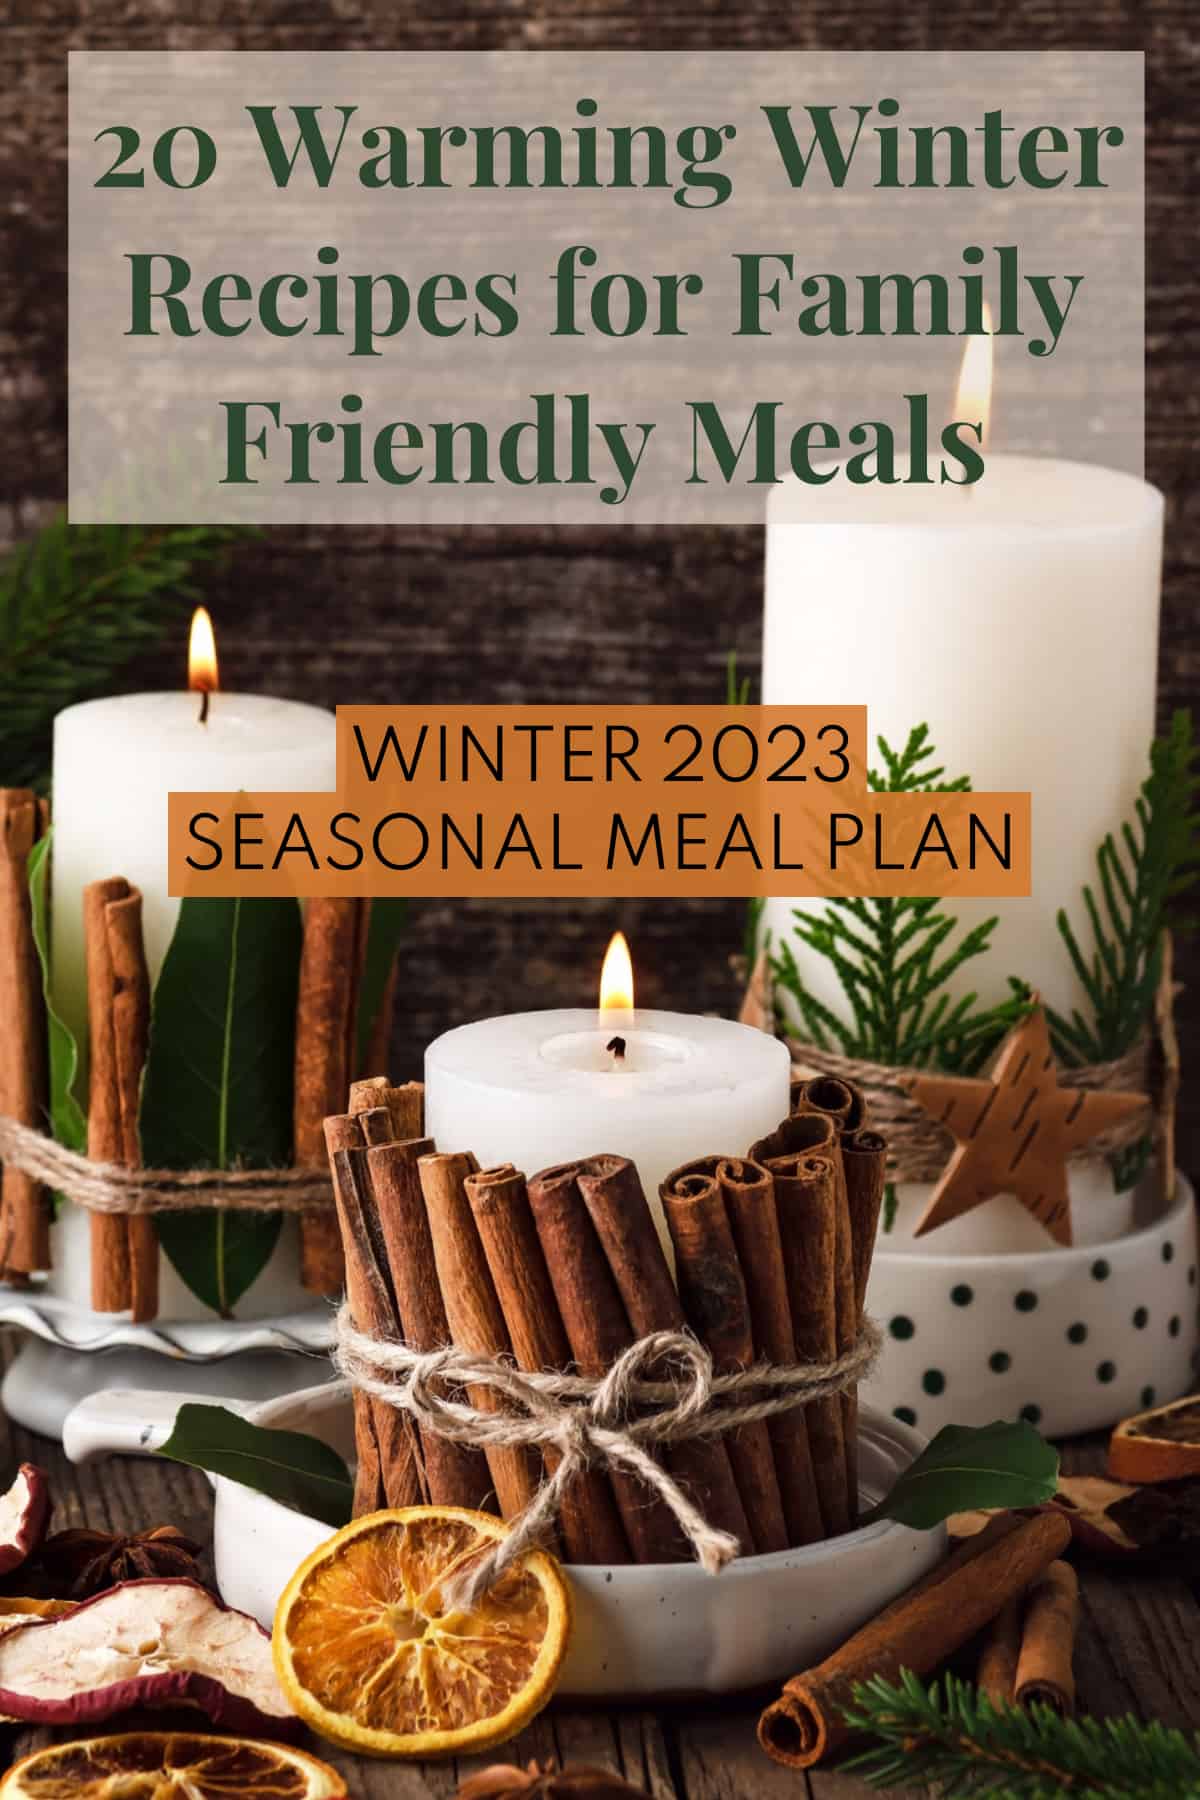 Candles wrapped in cinnamon sticks, bay leaves, and evergreen stems sit on a wooden surface. The words, "20 warming winter recipes for family friendly meals" and "winter 2023 seasonal meal plan" are in two boxes overlaid on the image.